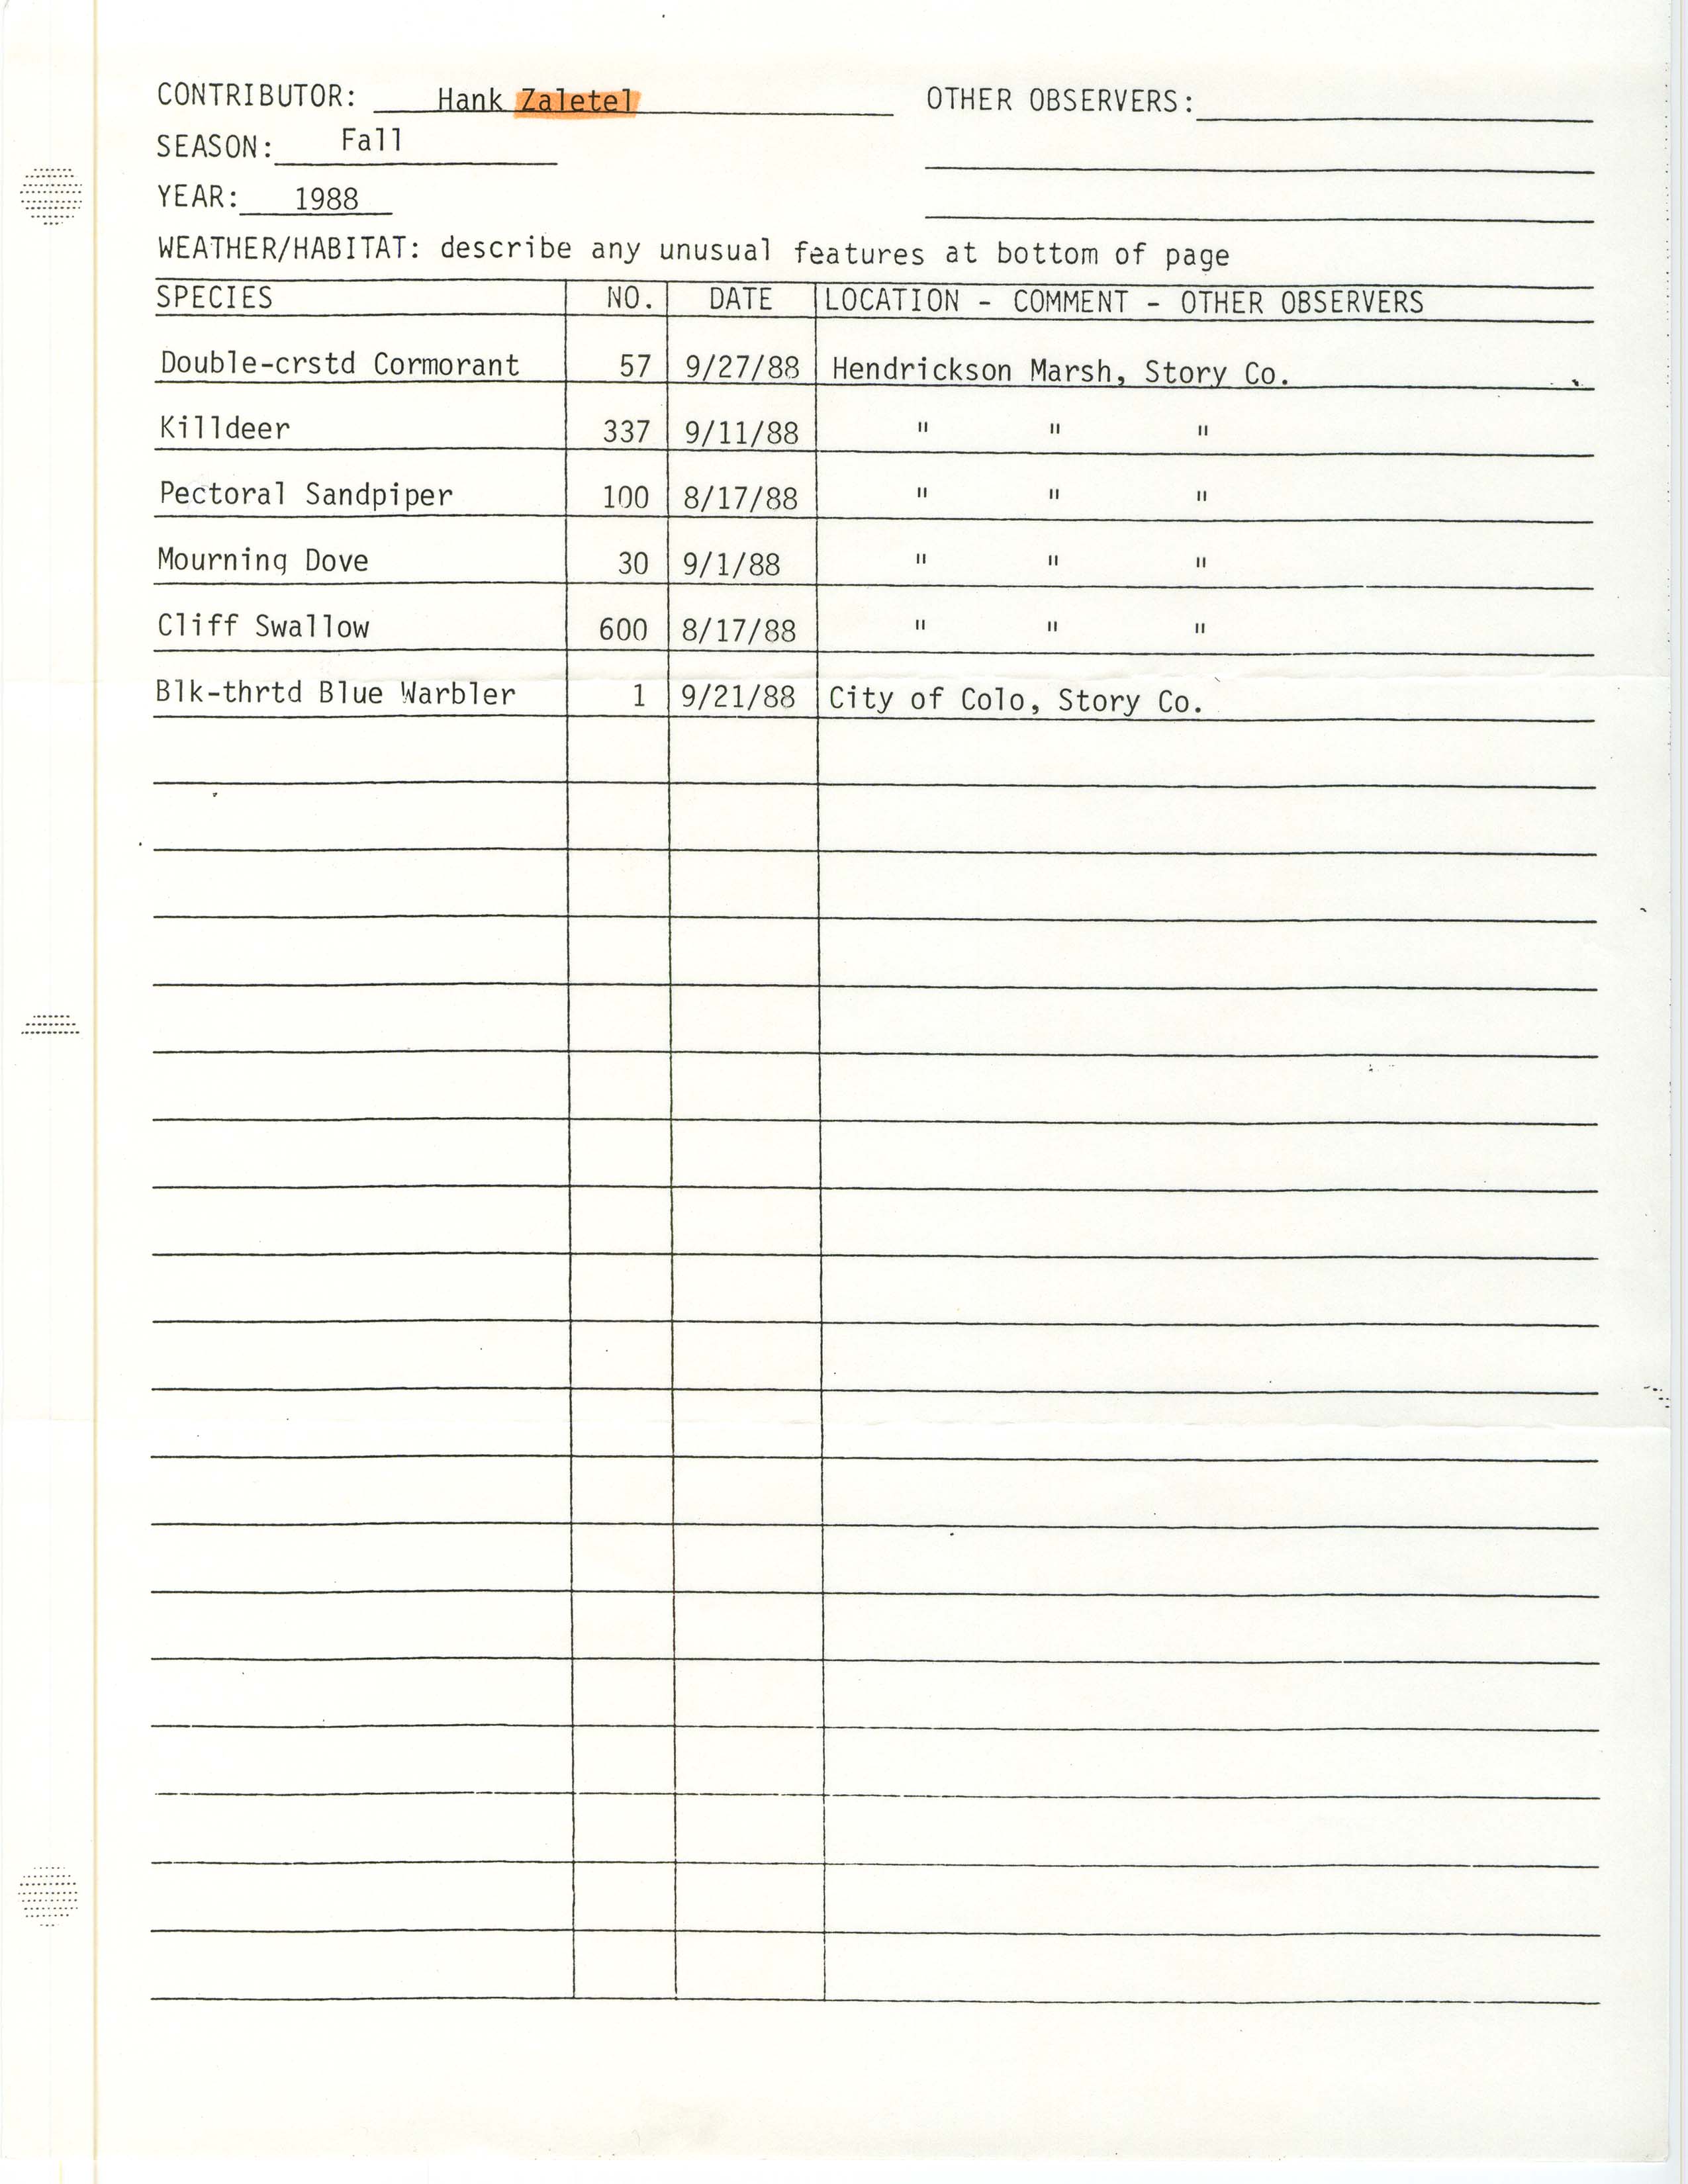 Field notes contributed by Hank Zaletel, fall 1988